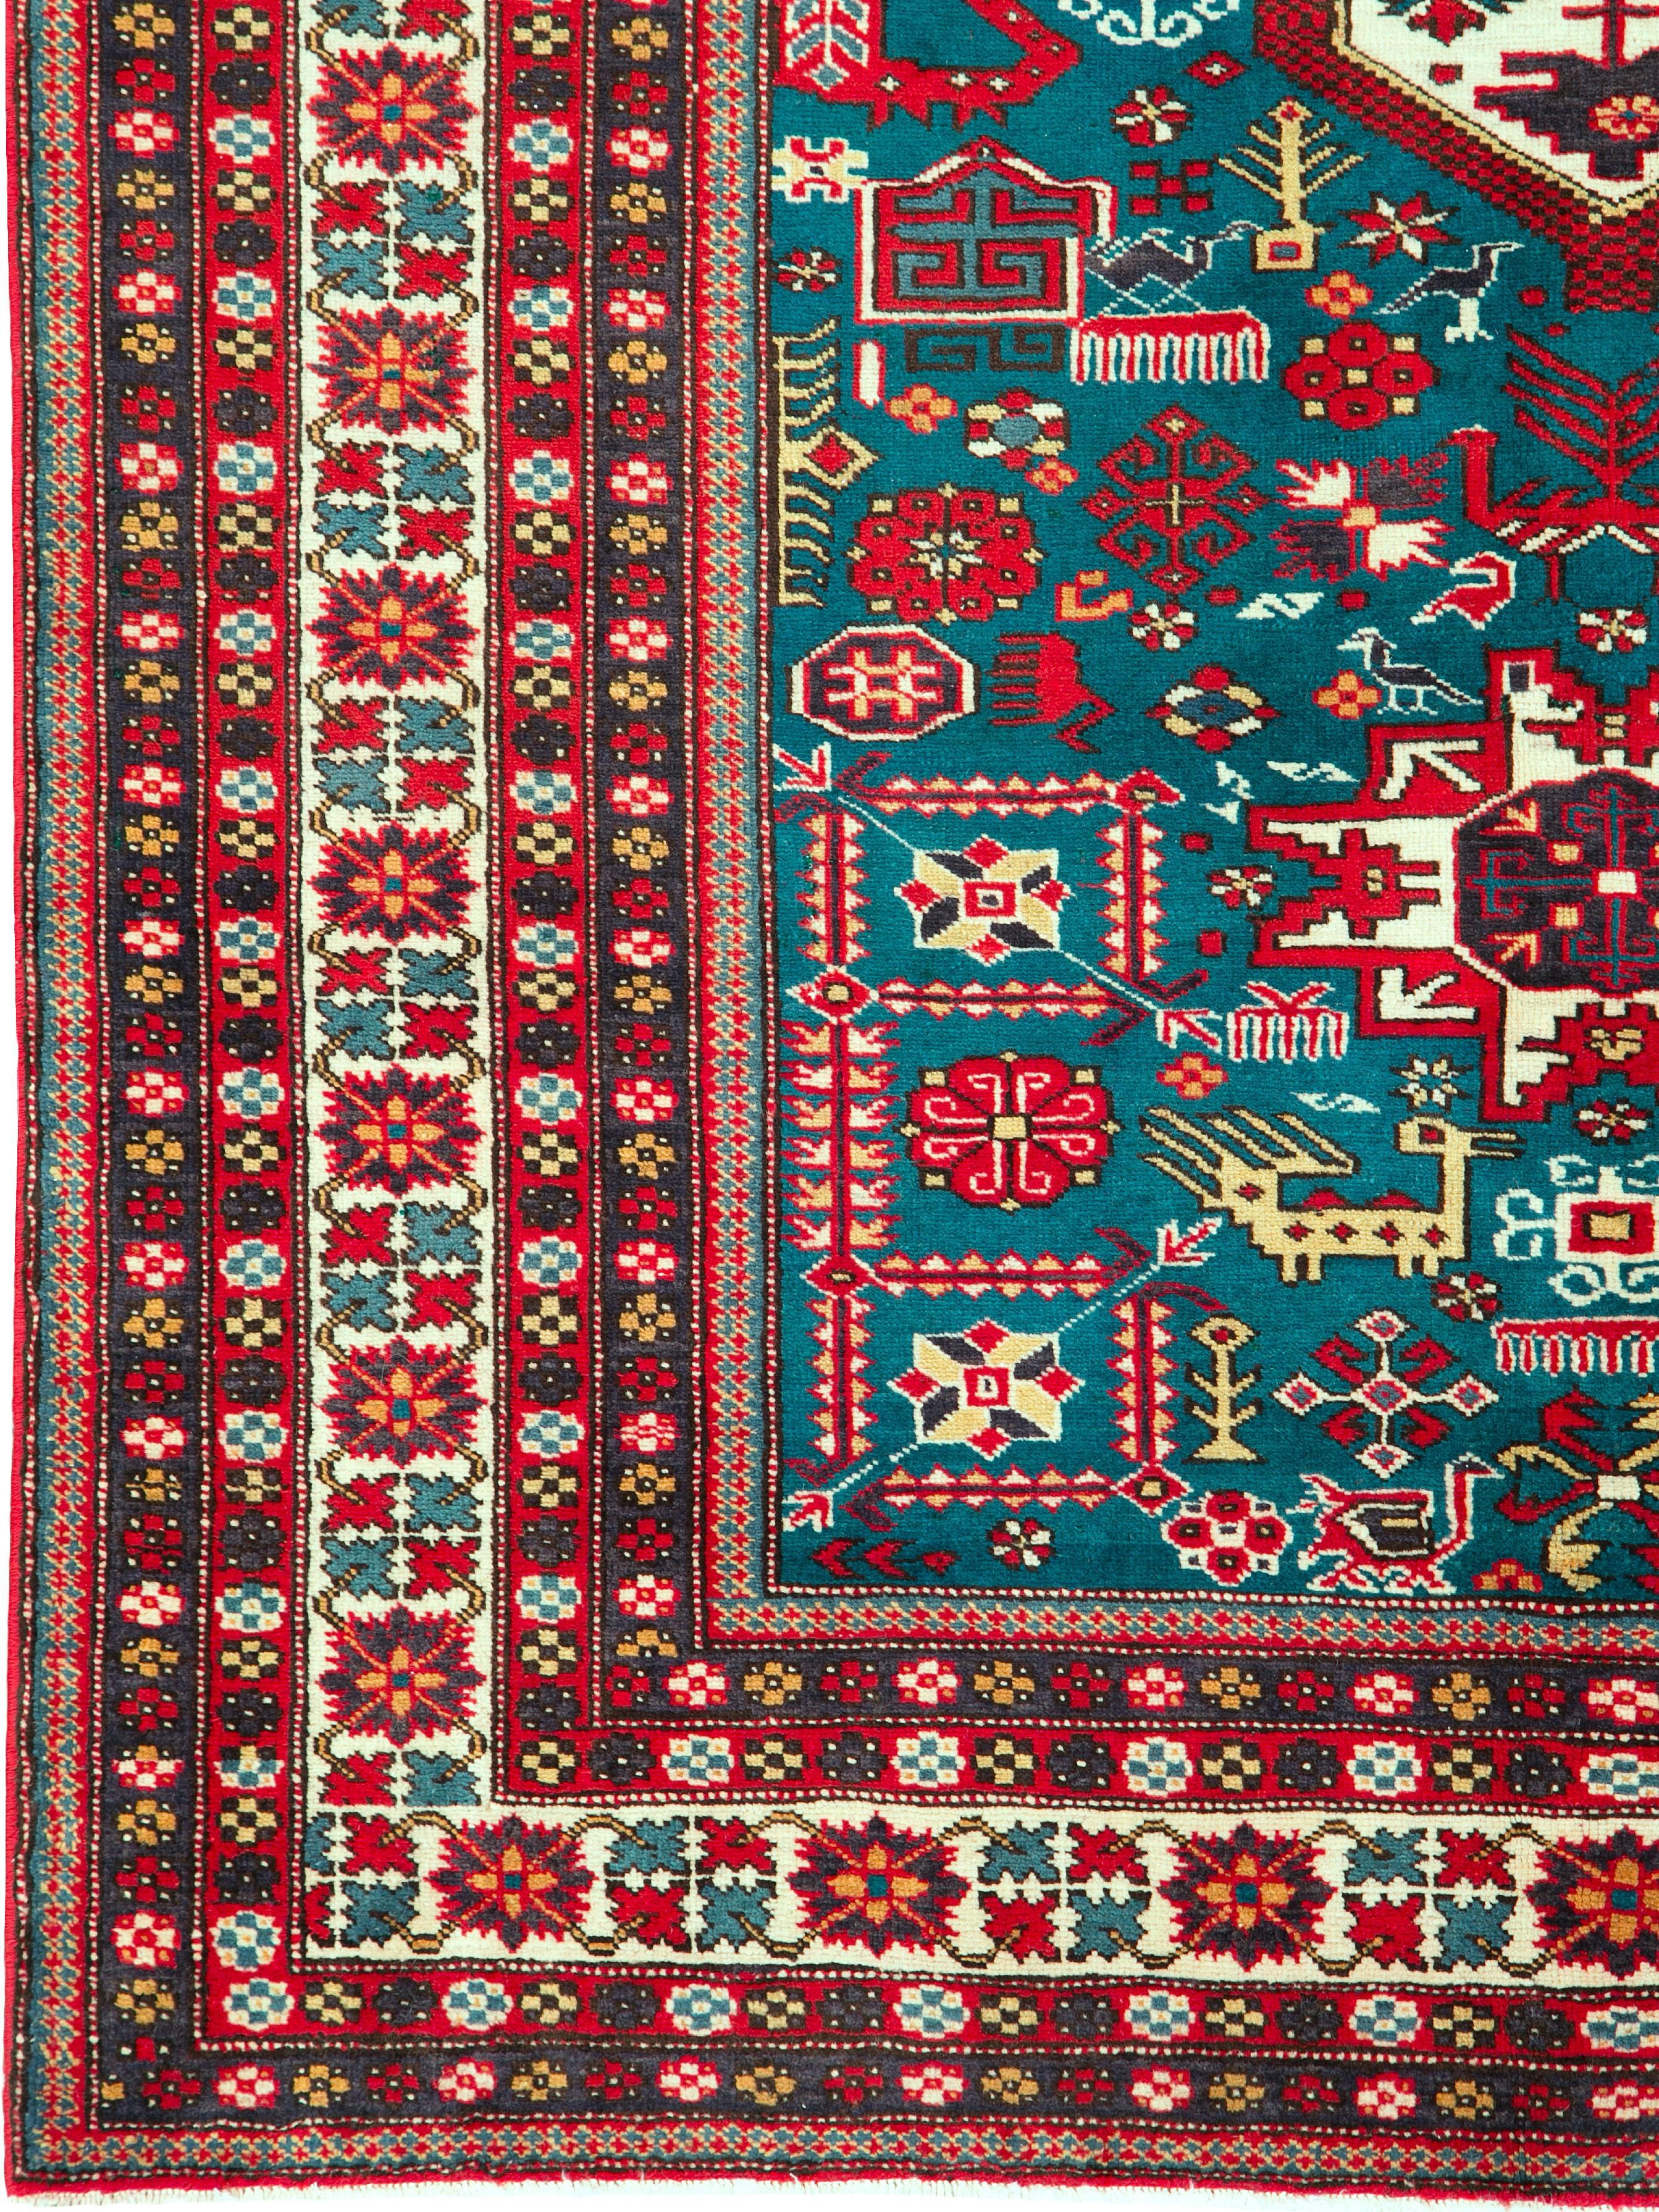 A vintage Persian Tabriz carpet from the second half of the 20th century.